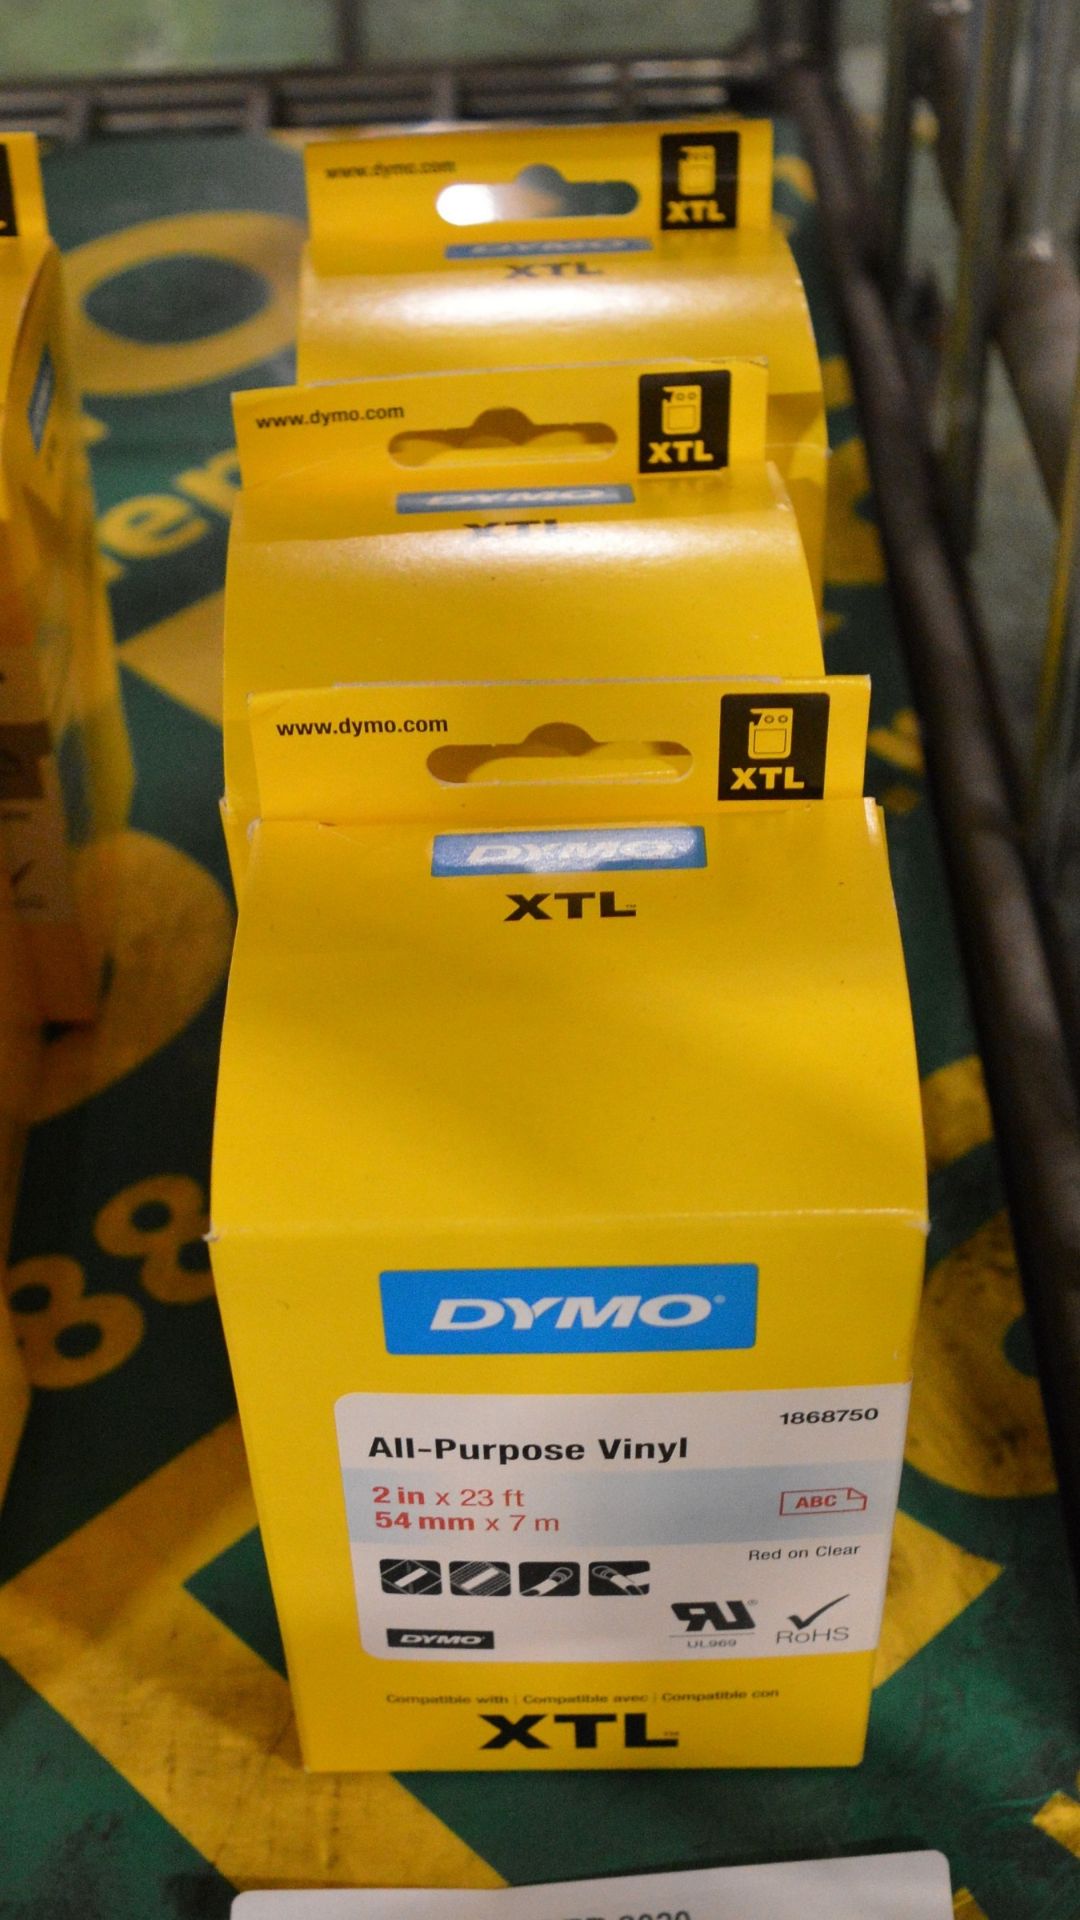 3x Dymo XTL All Purpose Vinyl - 2in x 23ft - 54mm x 7m Red on Clear Printer Tape